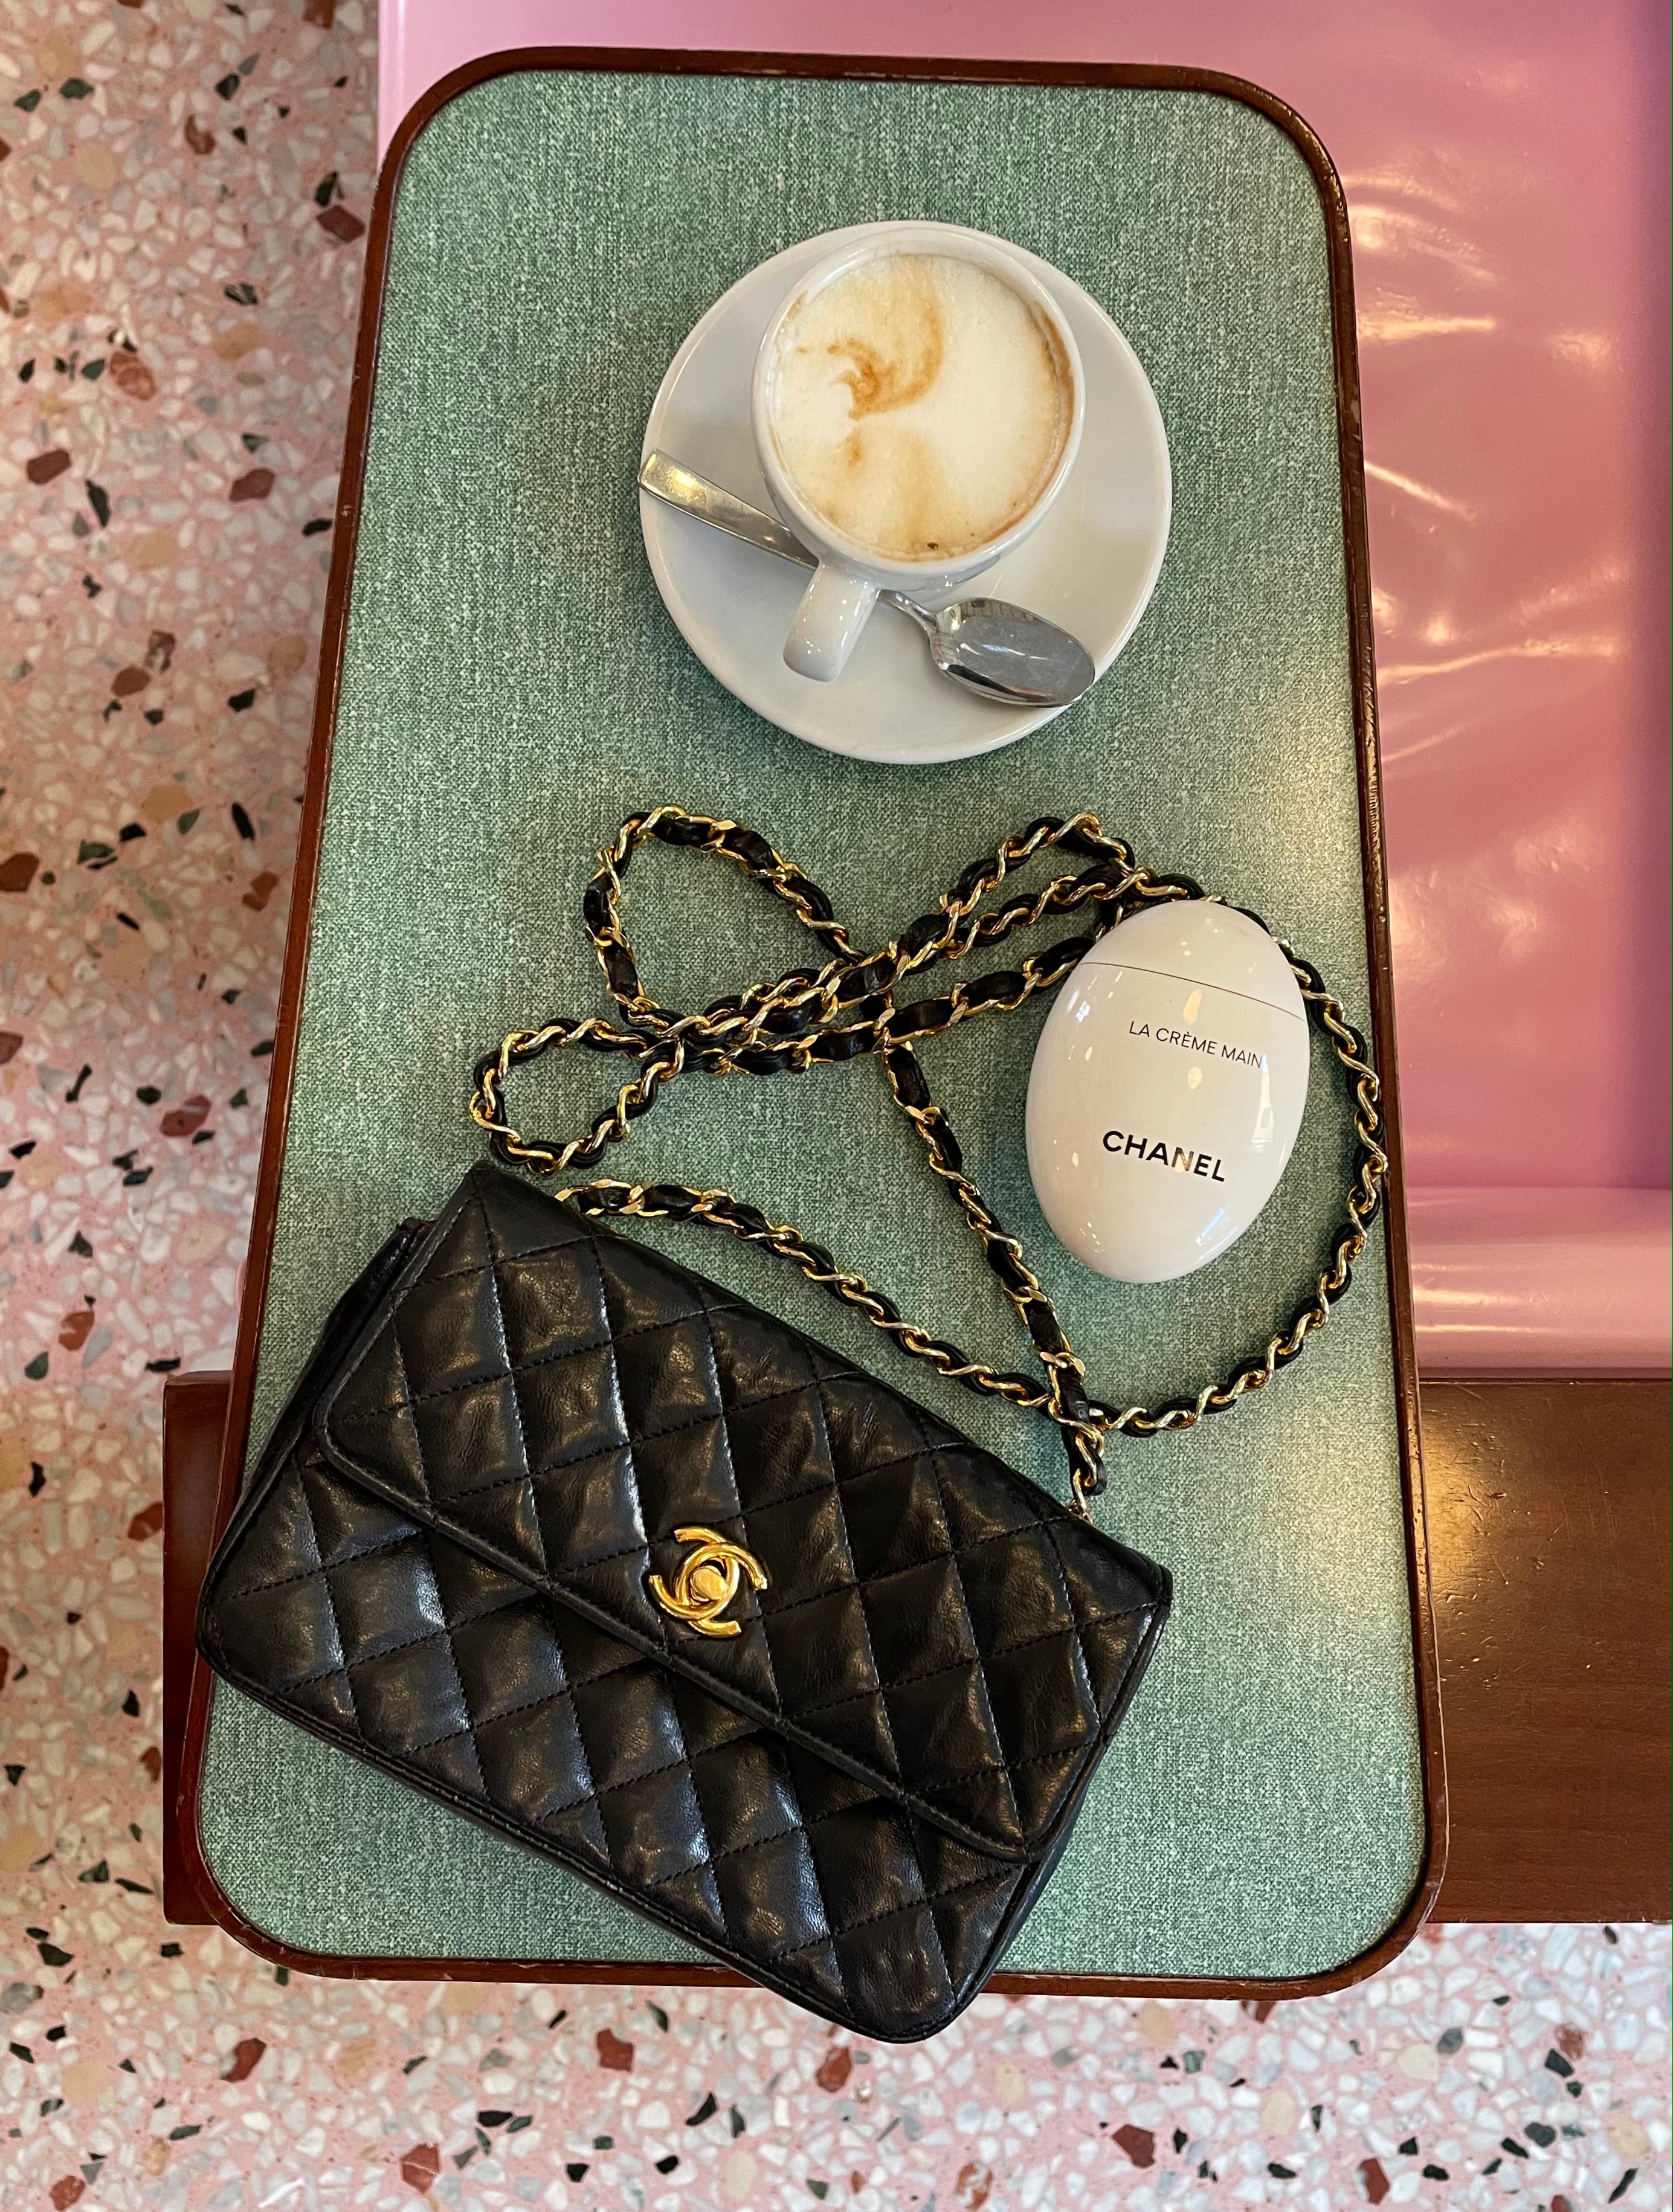 Alternative Bags to the Chanel Classic Flap 